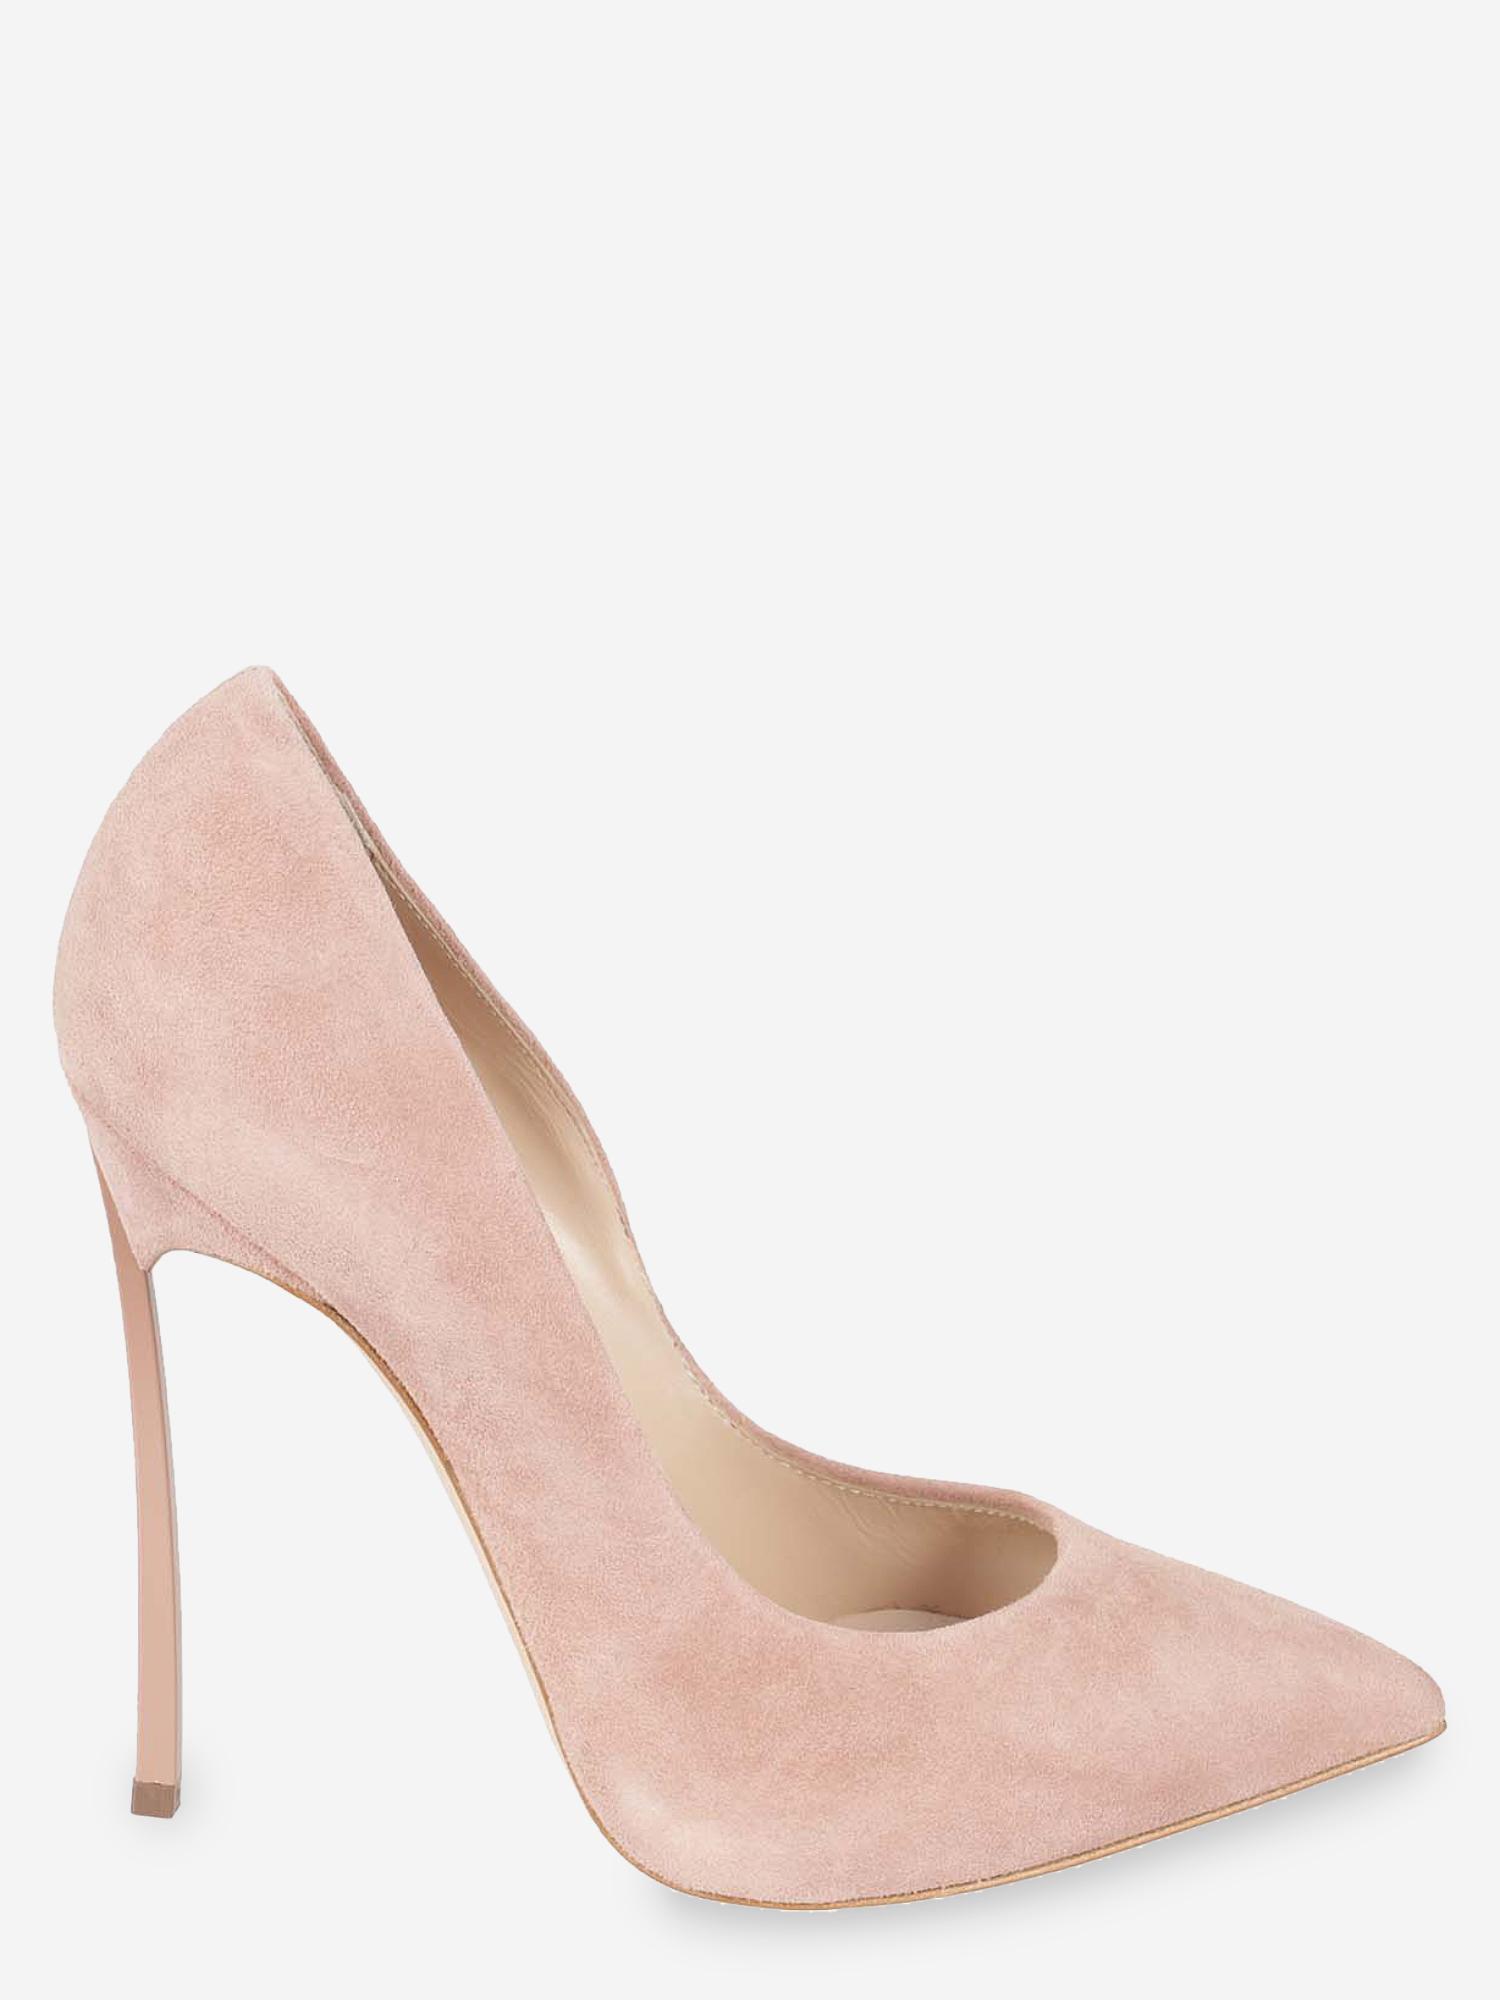 Casadei Shoes in Pink